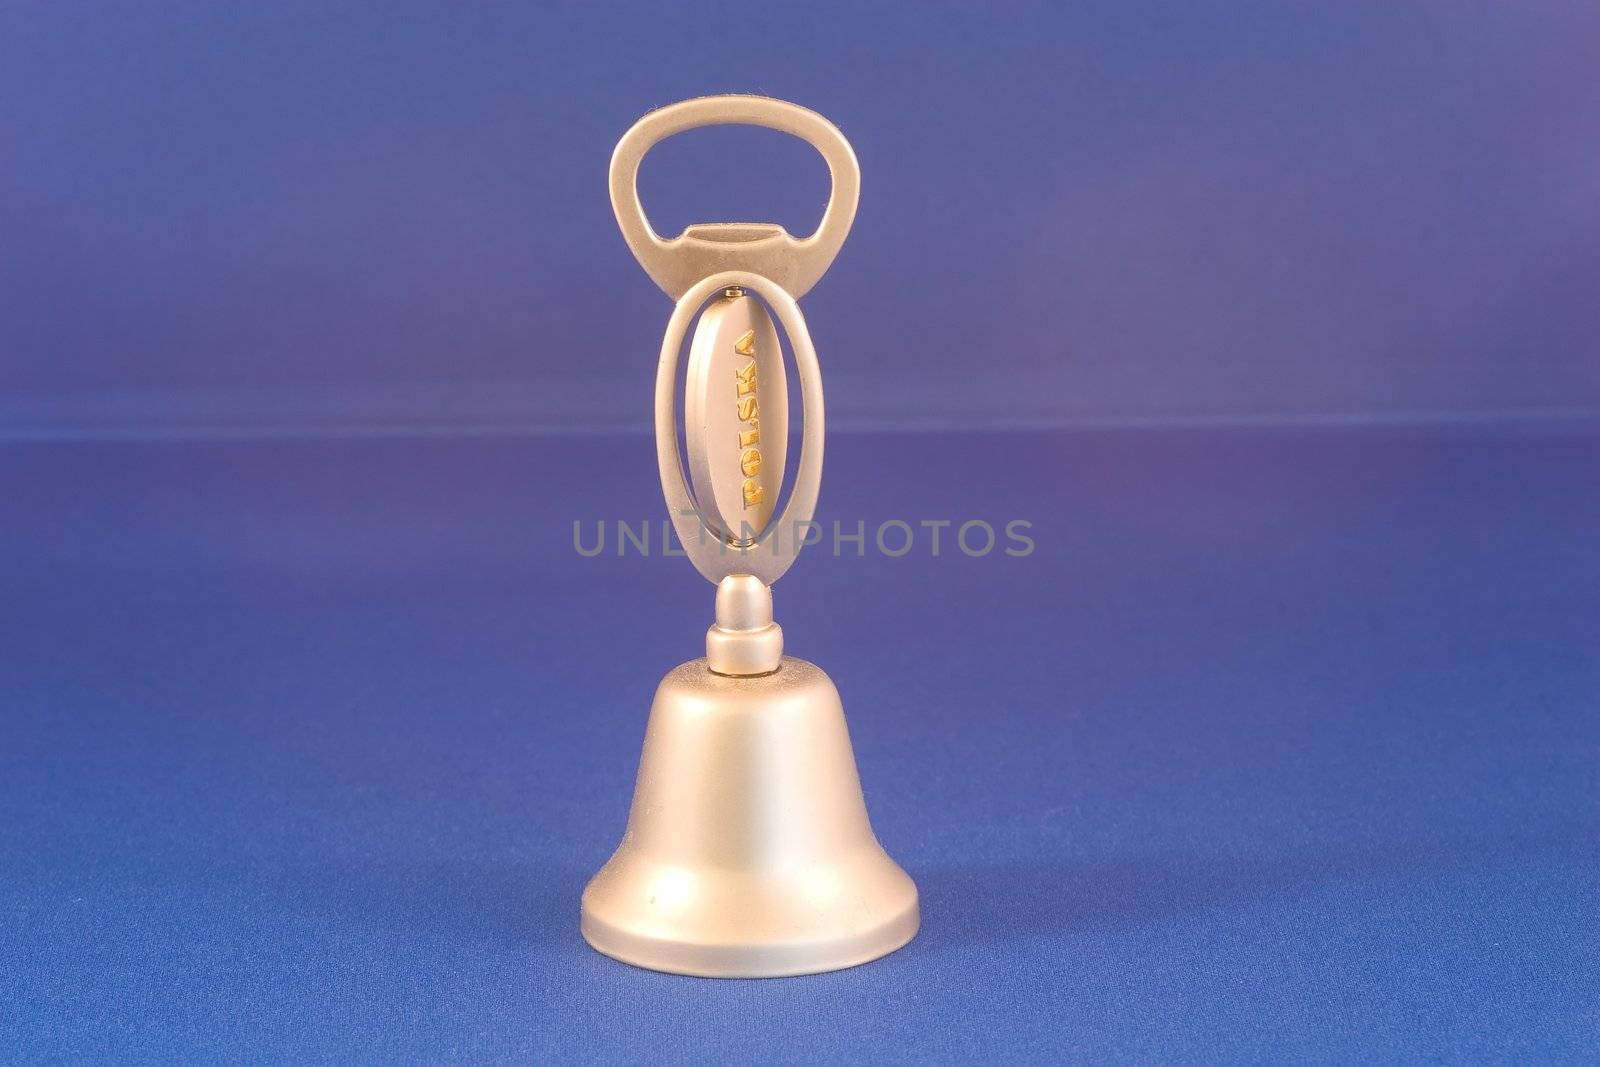 A handbell is a bell designed to be rung by hand